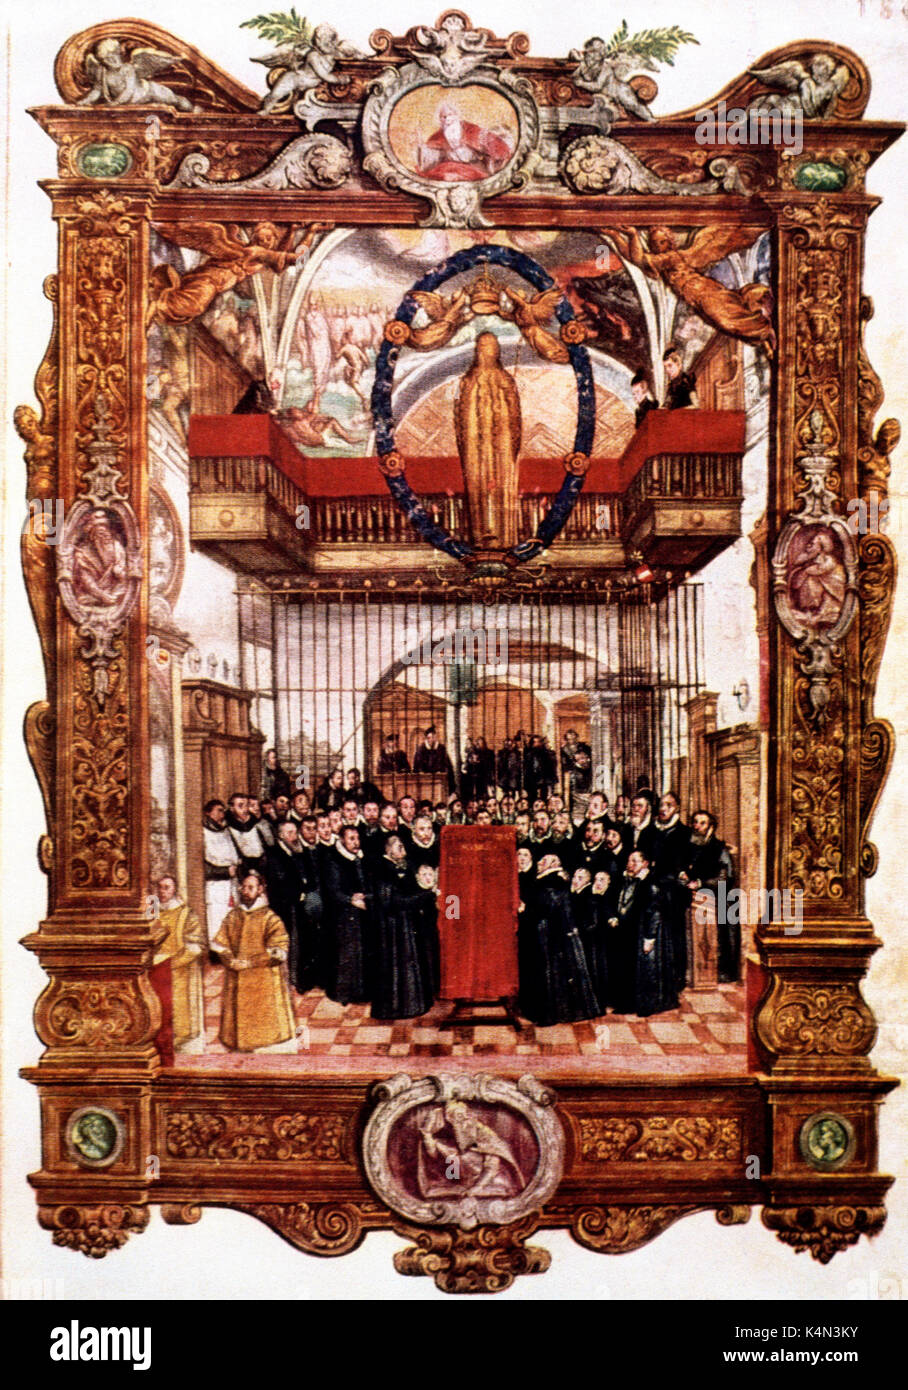 Lassus, Roland de / Orlando di Lasso - composer, contrapuntist, choirmaster from the Netherlands.  Scene of him with choir in service at Laurentius Hofpfarrkirche, Munich, Chapel Royal,  Hofkapelle  (Bavarian chapel royal) . LASSUS (in yellow) stands to the left of the pulpit. Detail from book of psalms by Lassus illumination by Hans Mielich, 1565-60. (HM 1516-73).    Lassus- 1532 - died Munich 14 June, 1594. Stock Photo